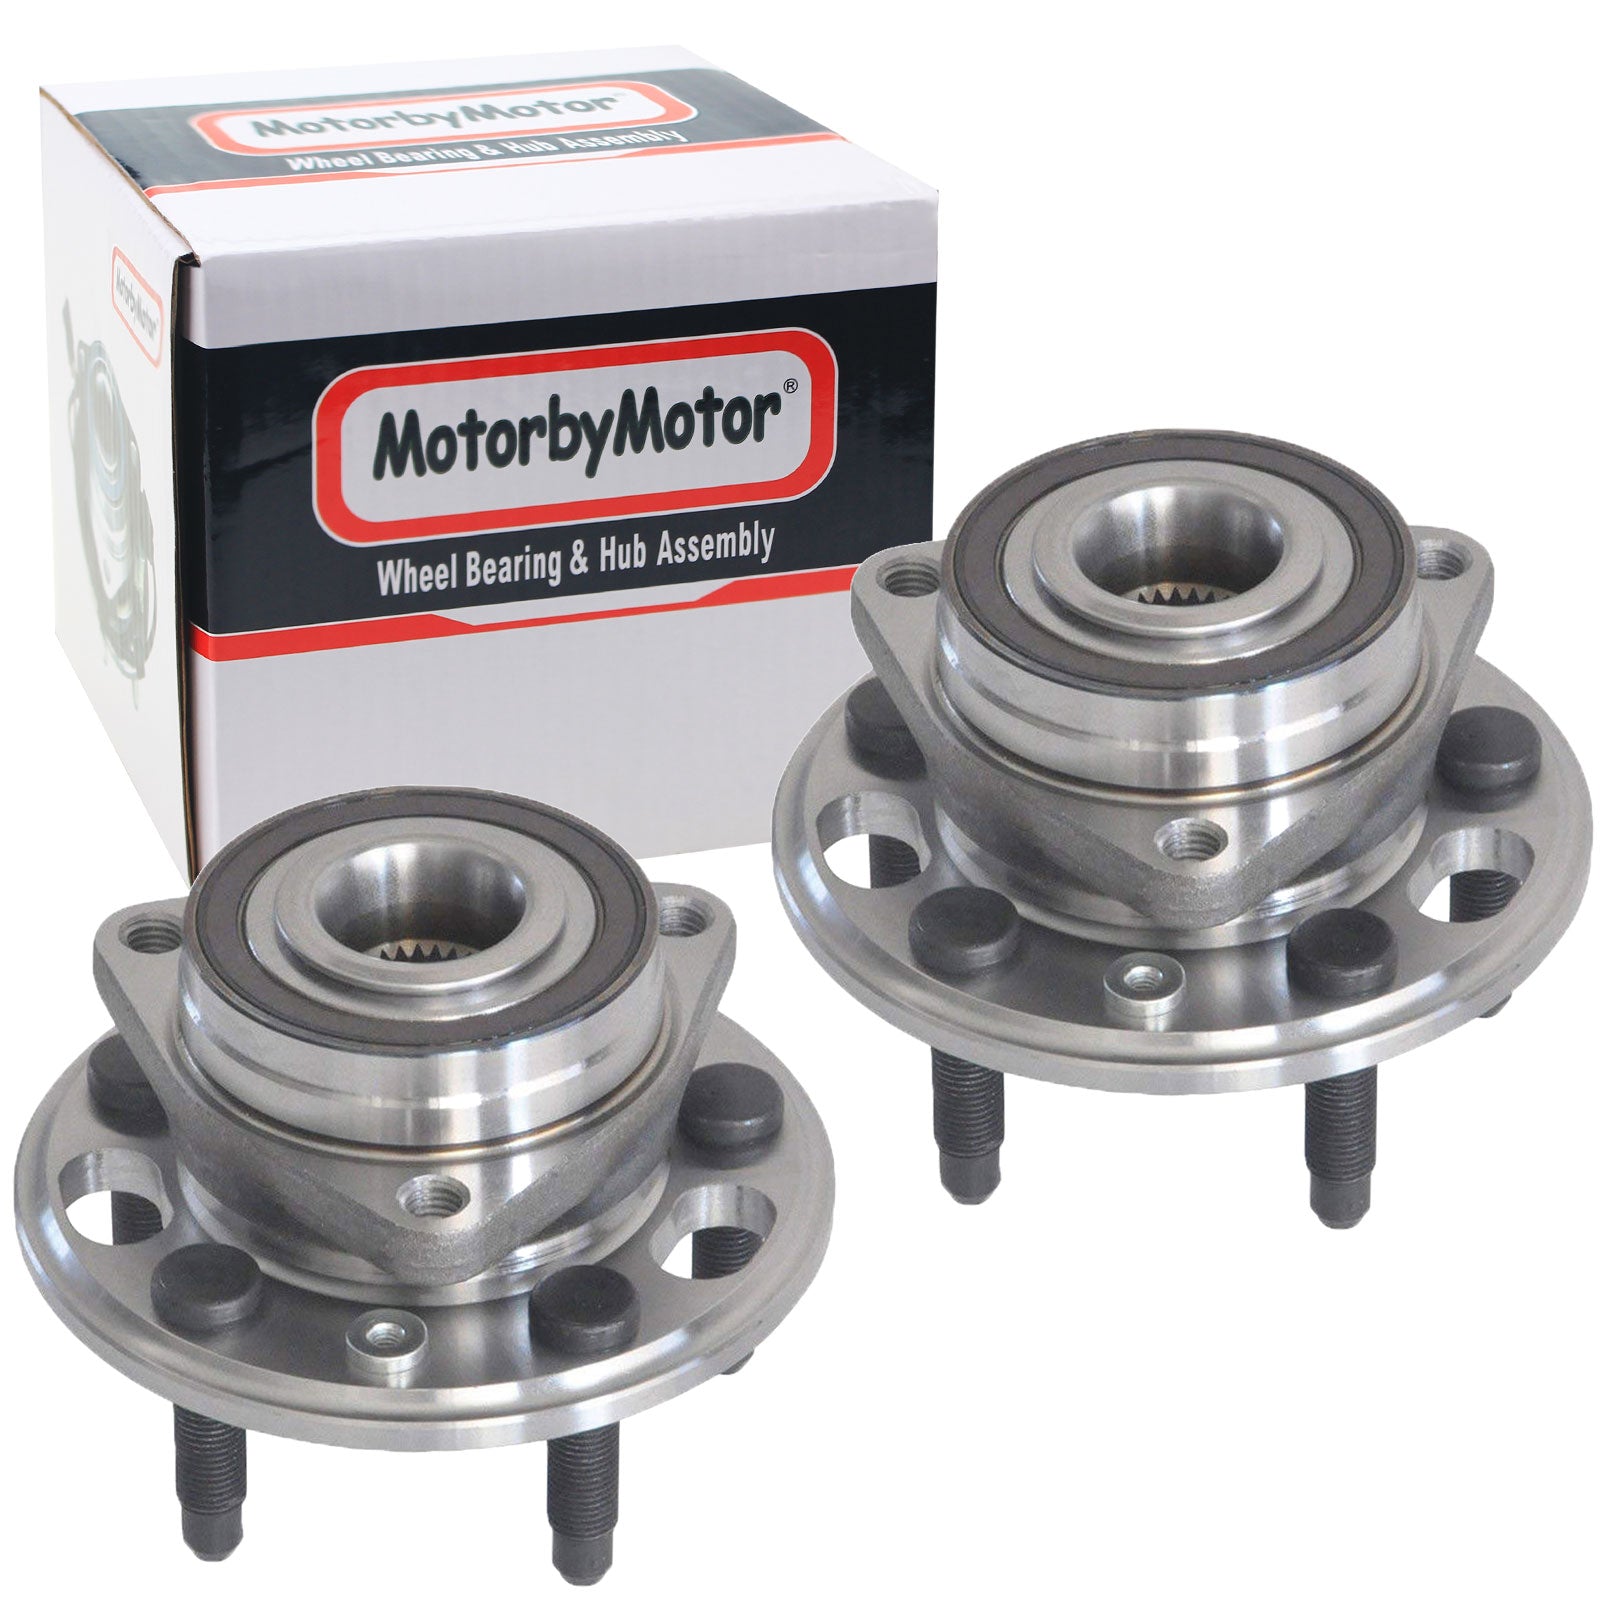 MotorbyMotor 513288 Rear Wheel Bearing and Hub Assembly w/5 Lugs for Cadillac XTS, Buick Lacrosse Regal Allure, Chevy Malibu Impala, Saab 9-5 Hub Bearing (w/ABS Magnetic Ring)-2 Pack